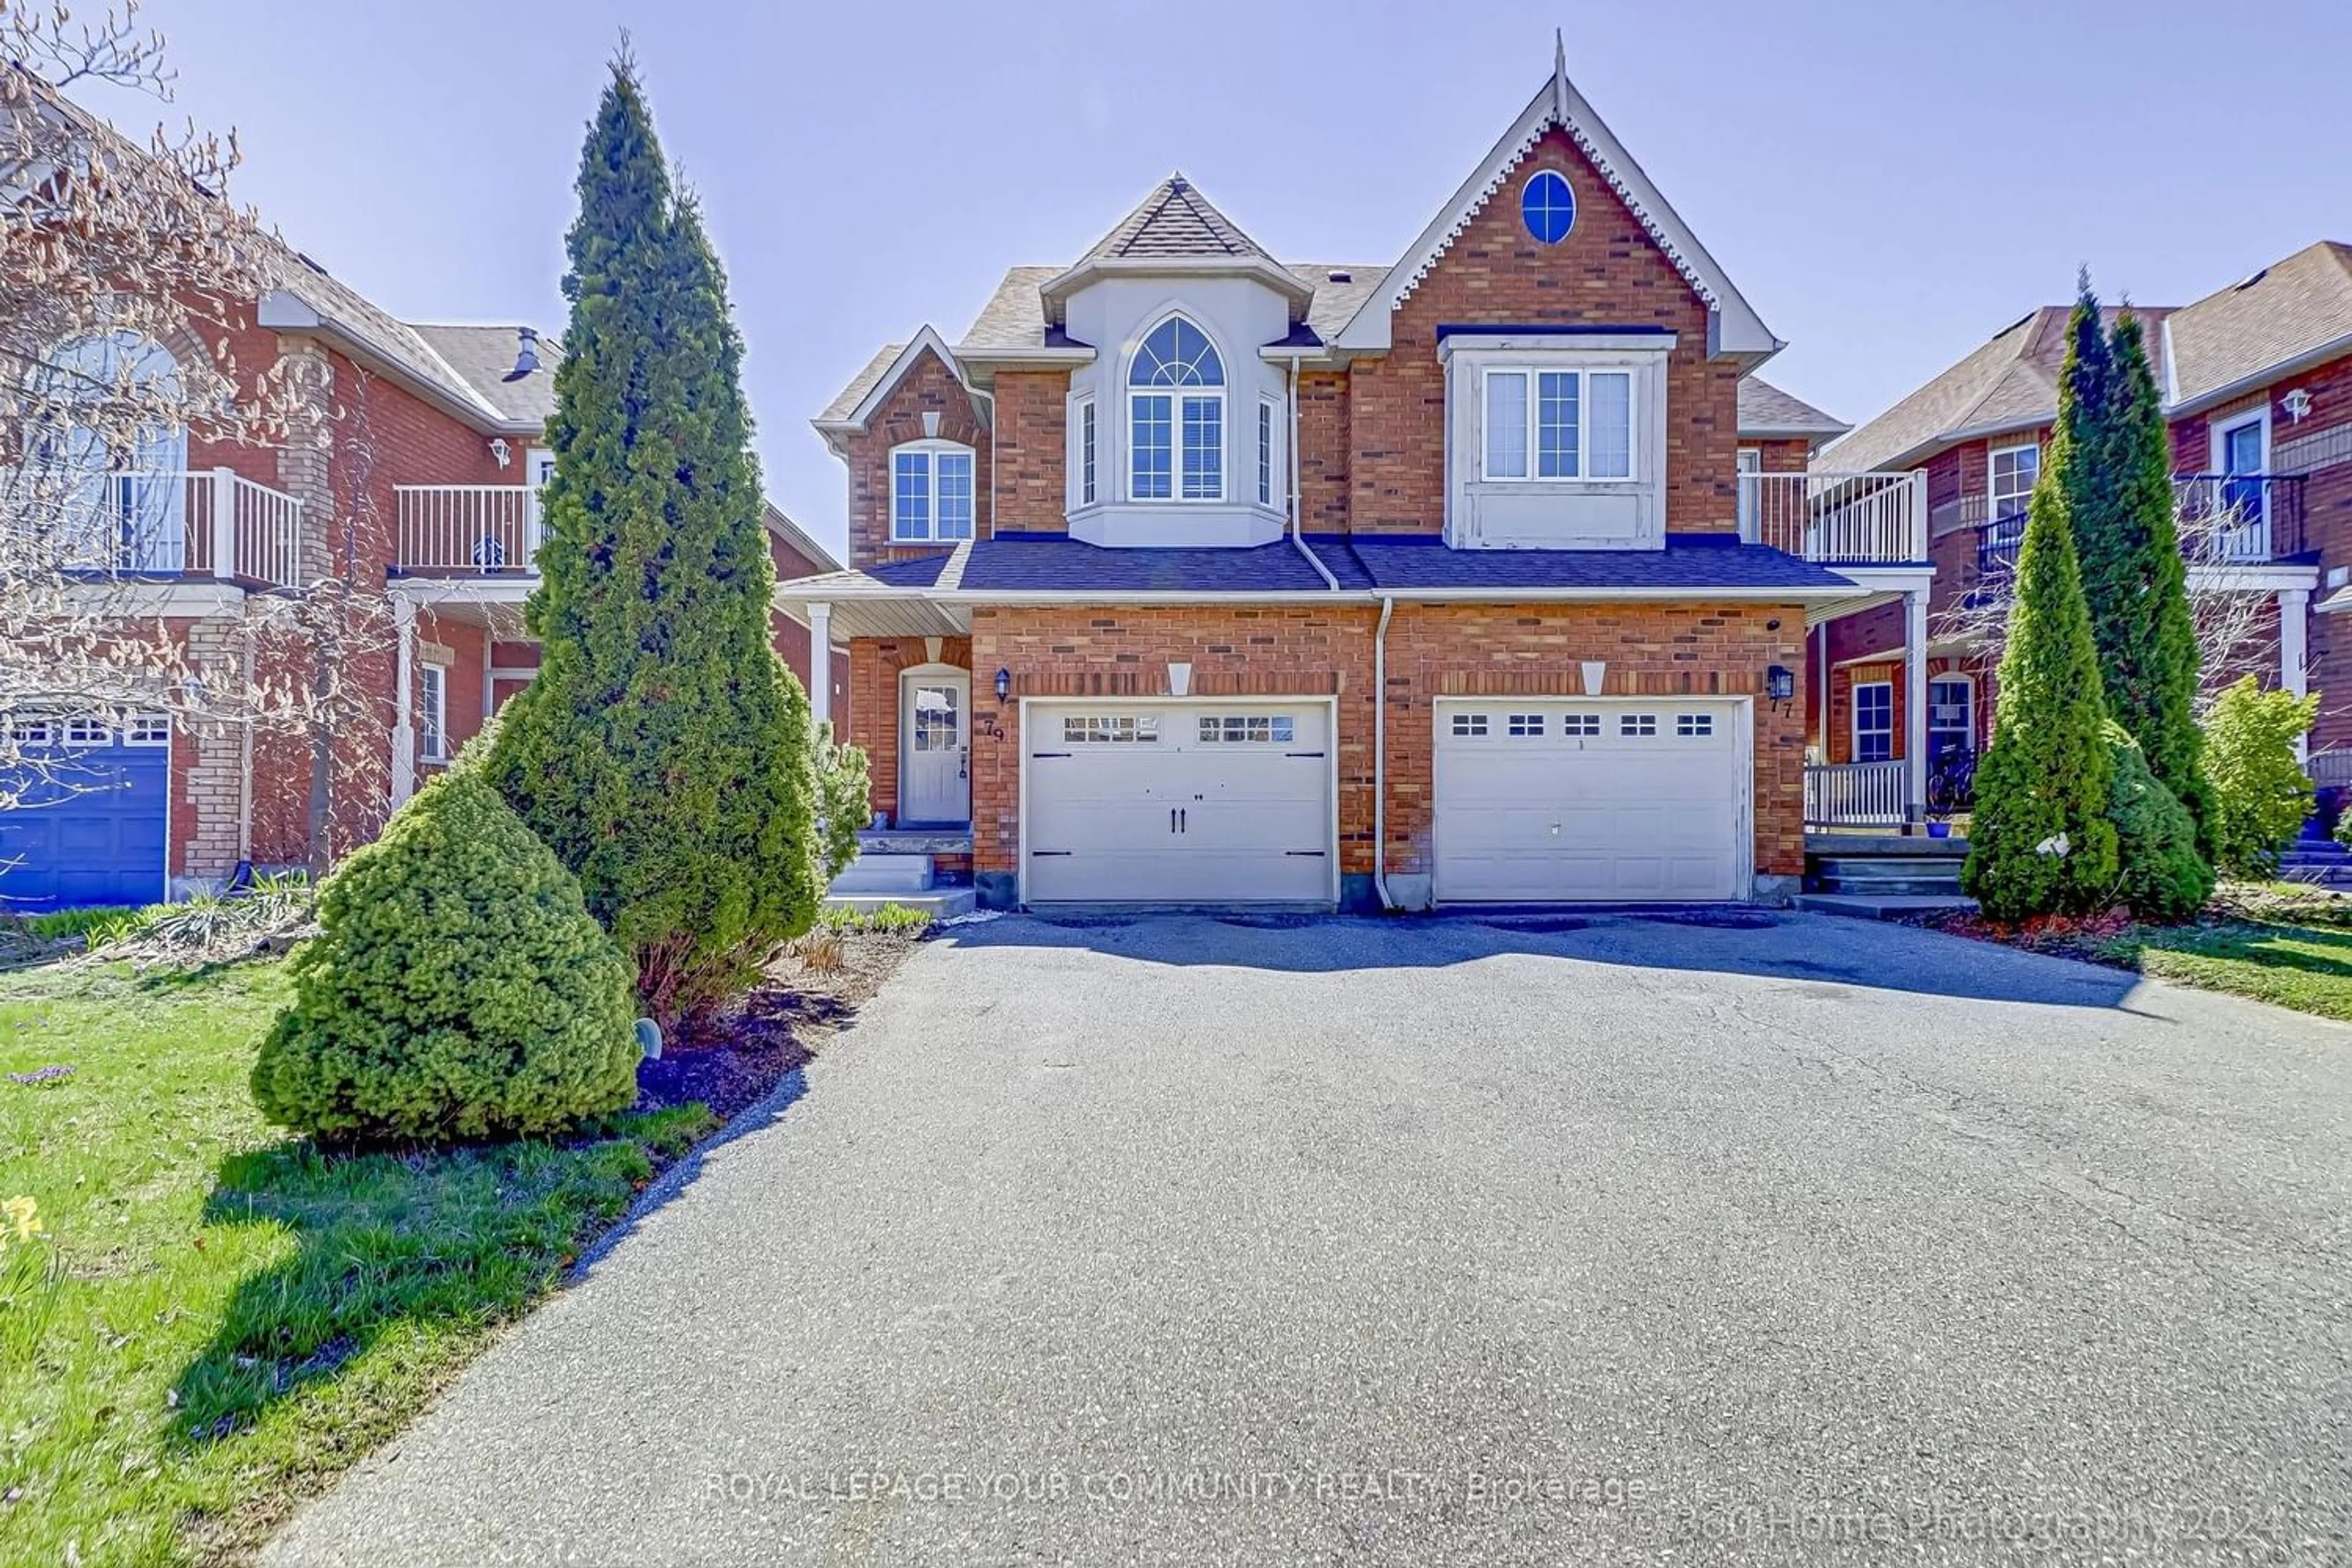 Street view for 79 Antique Dr, Richmond Hill Ontario L4H 4G3